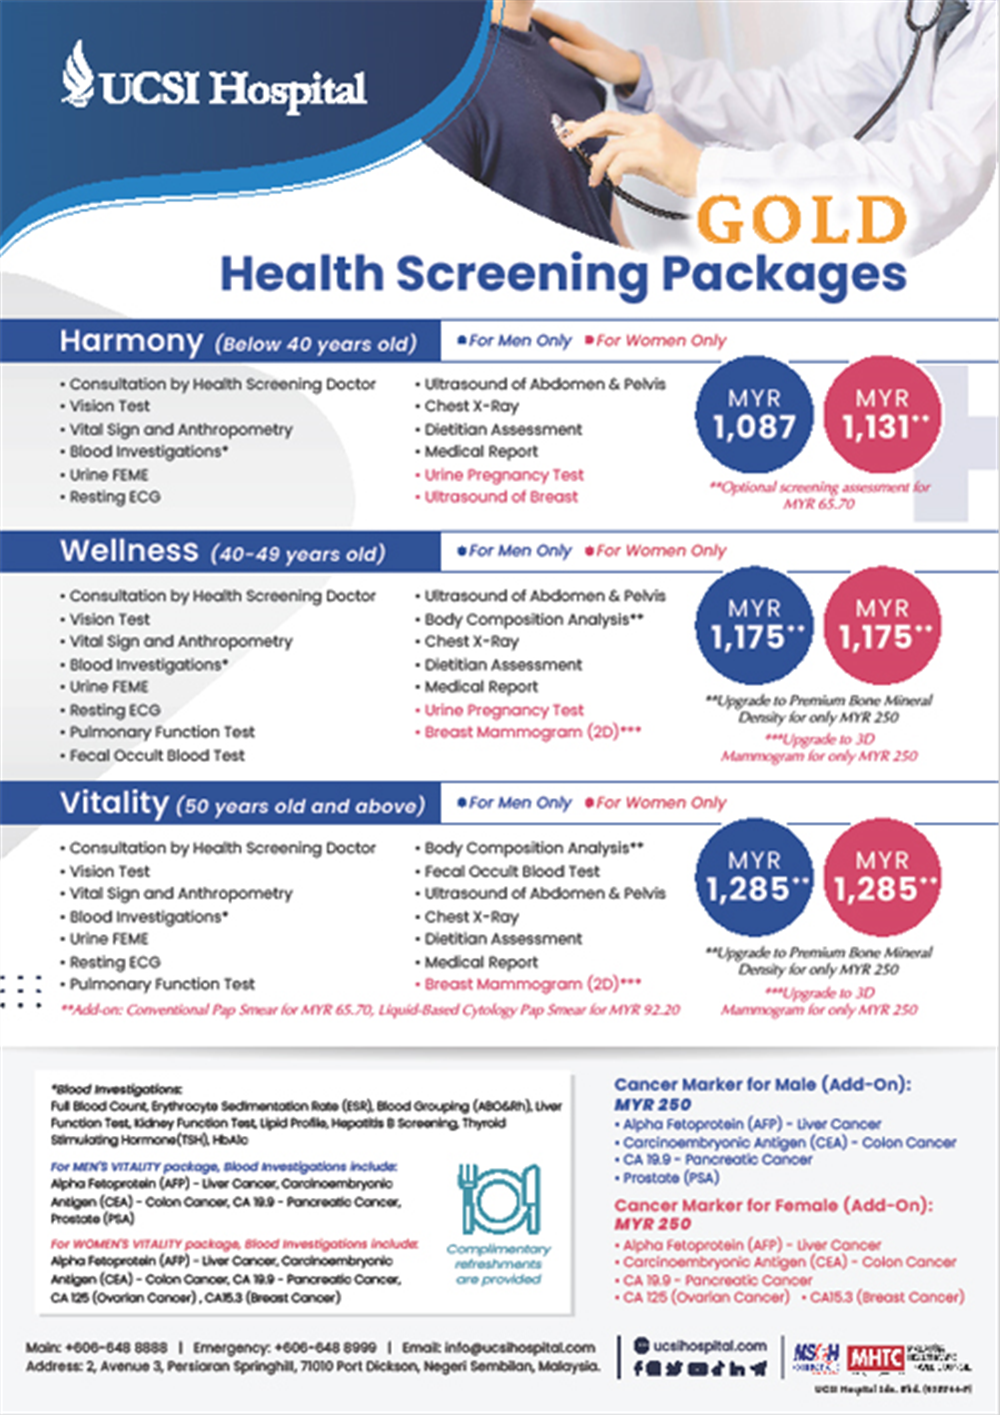 Health Screening Packages (Gold)